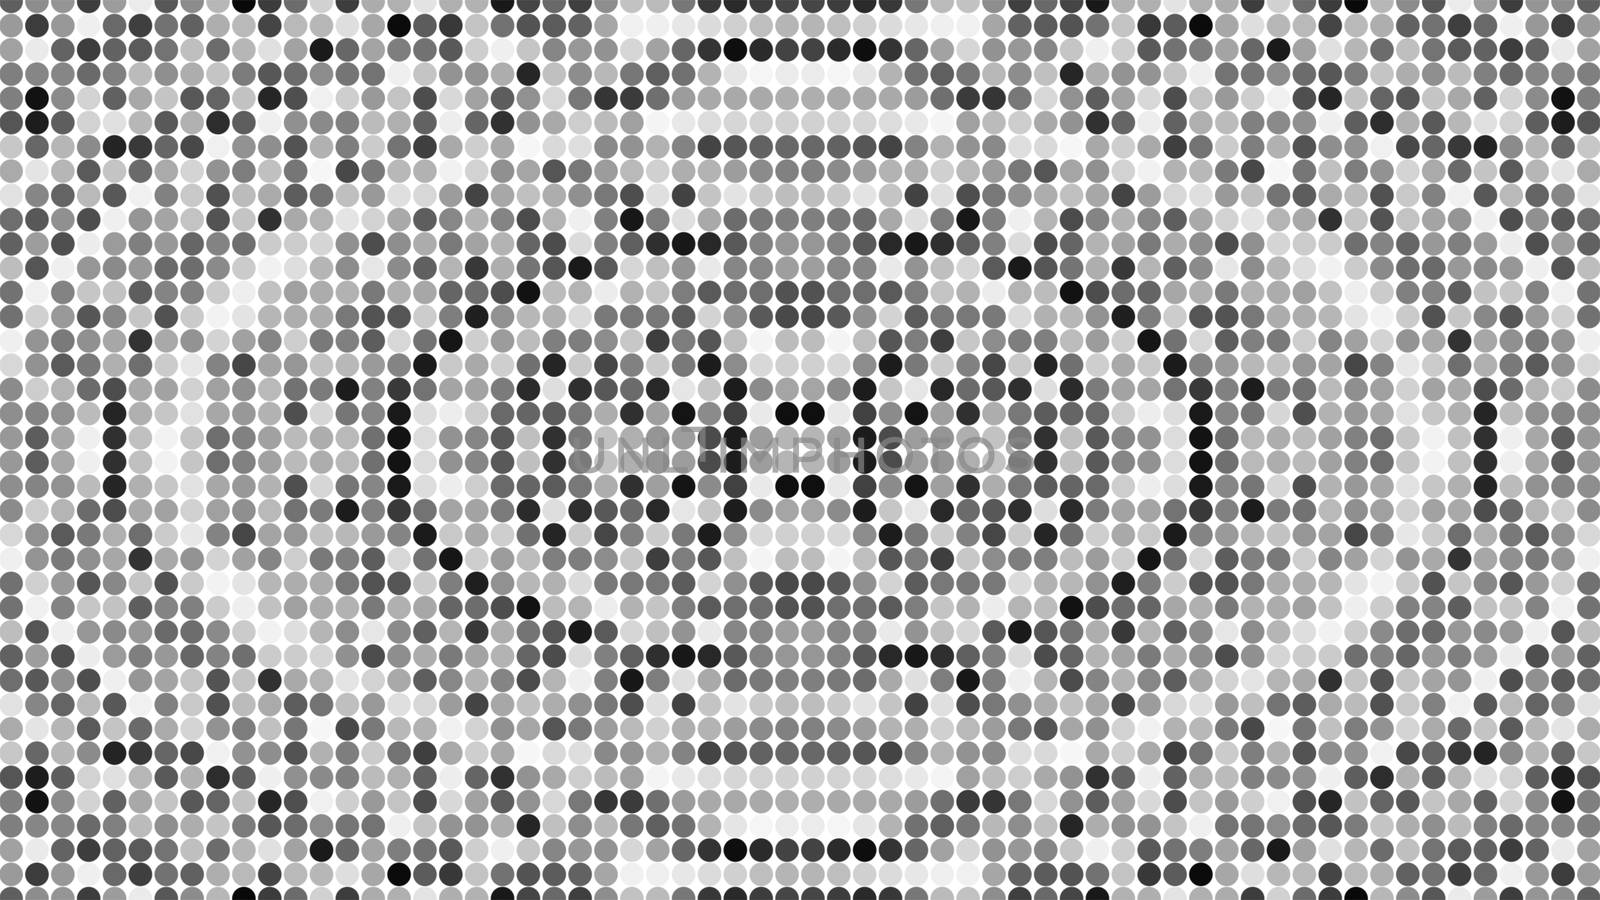 Abstract halftone dotted background. Monochrome pattern with dot and circles. 3d rendering